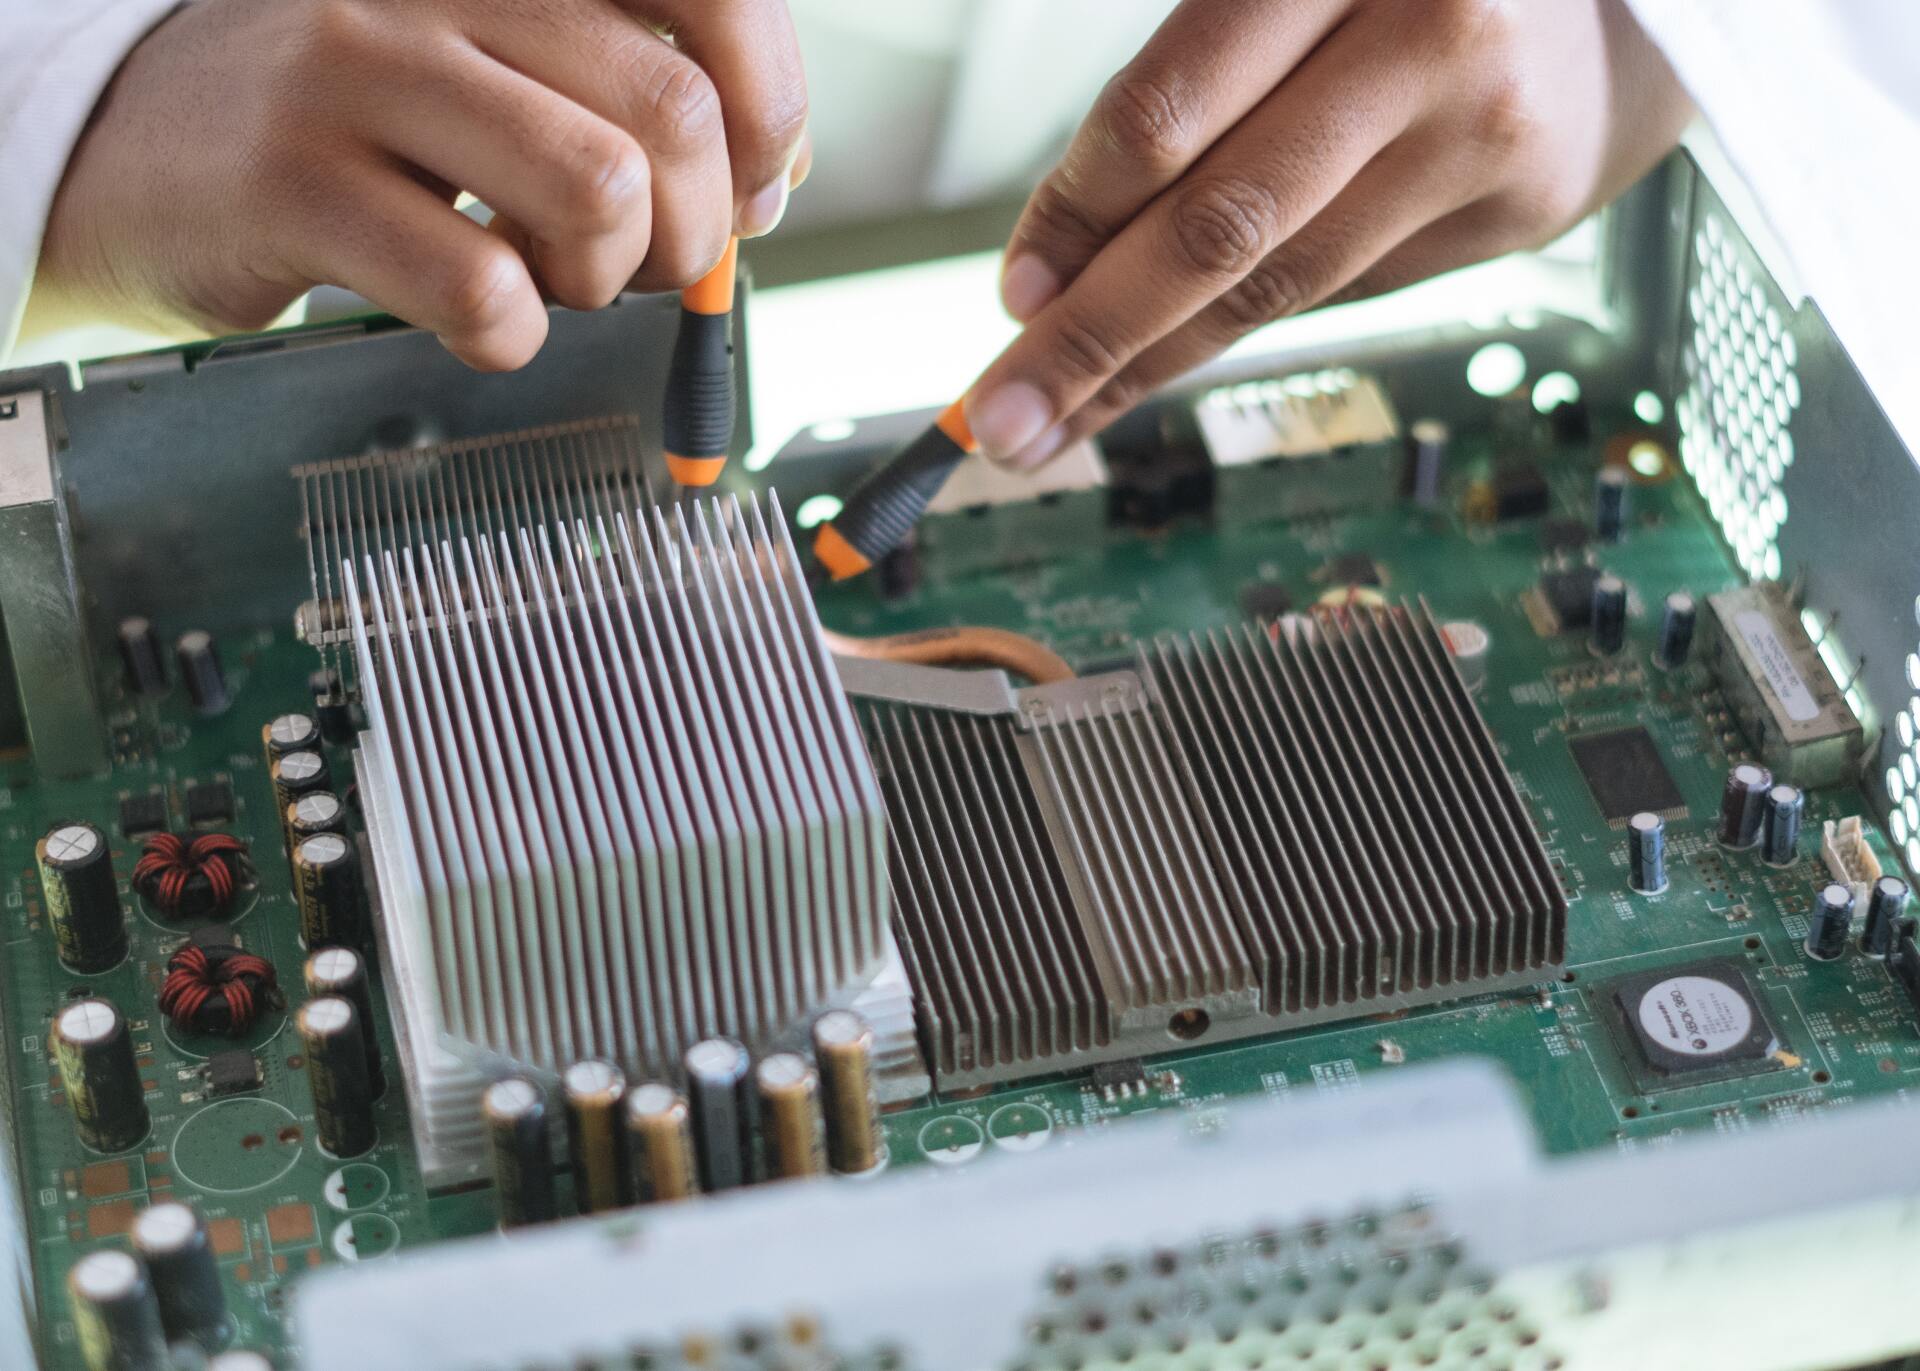 Repairing the CPU of the computer